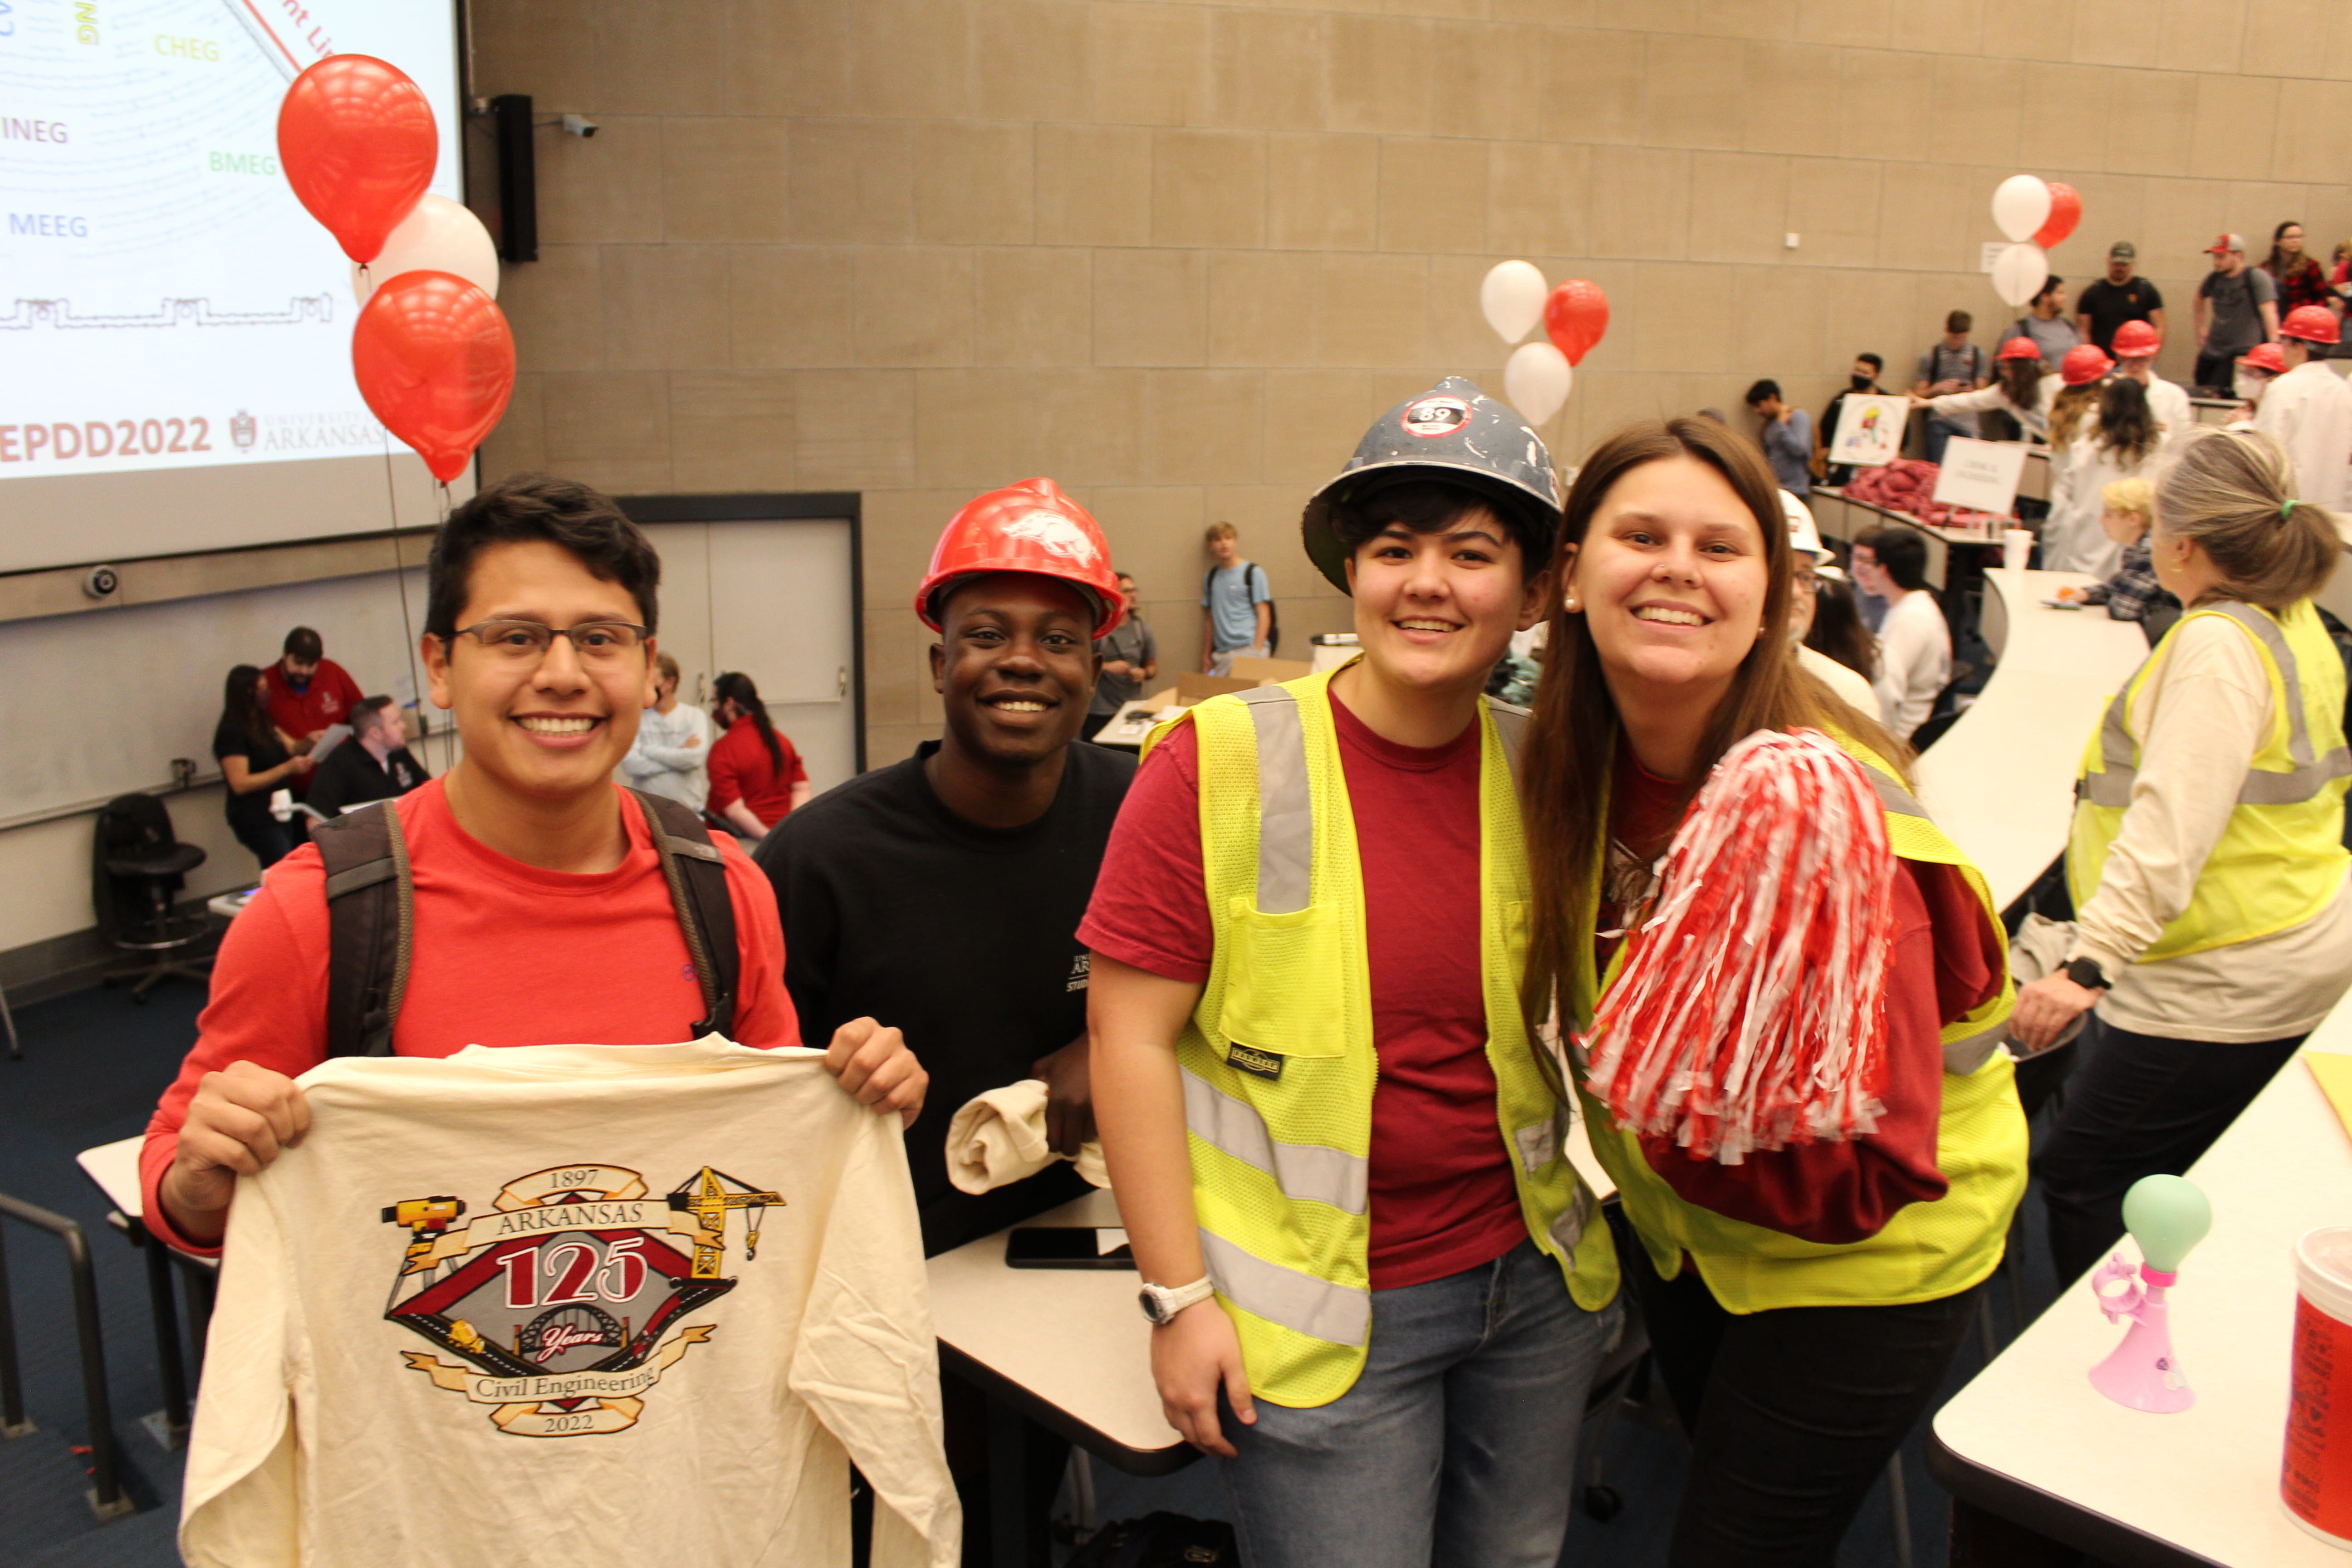 Civil engineering students Anthony Rivas, Victor Awopetu, Sarah Raycher and Bailey Downing pause for a picture during the festivities.